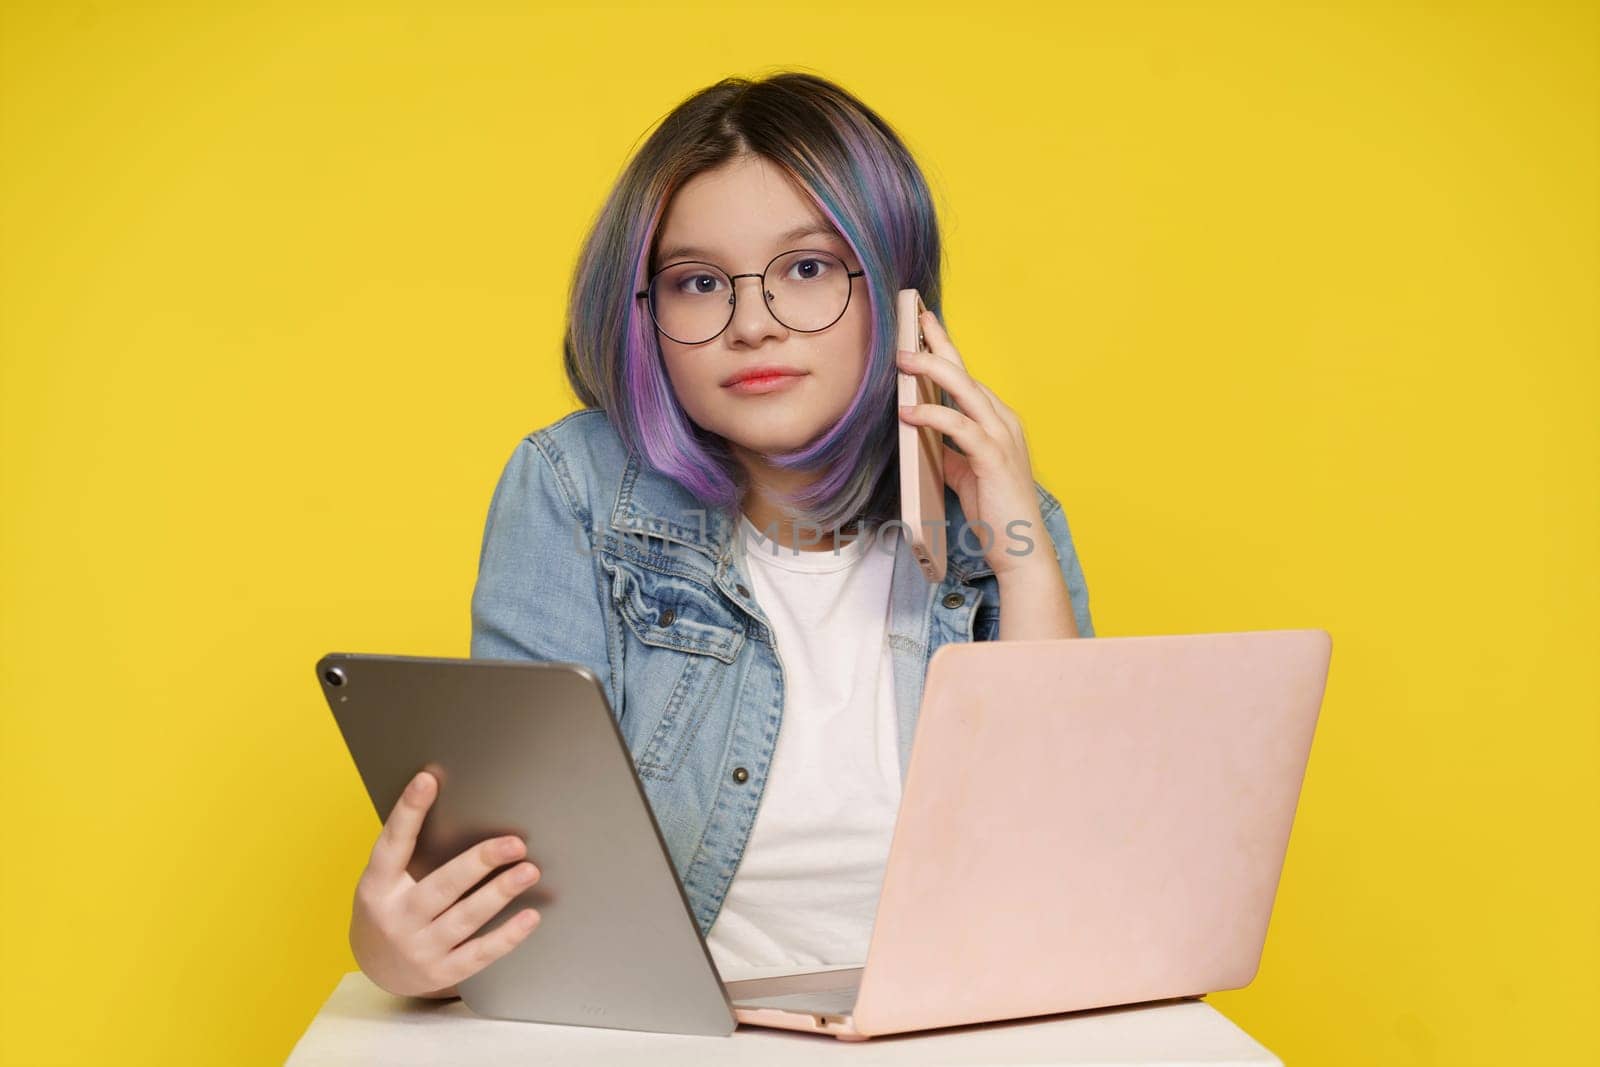 Modern Technology In Daily Life, Teenage Girl Holding Laptop, Tablet Pc, And Mobile Phone. Isolated On Yellow Background, Concept Of Tech-Savvy Lifestyle, Devices Seamlessly Integrate Into Daily Activities. High quality photo